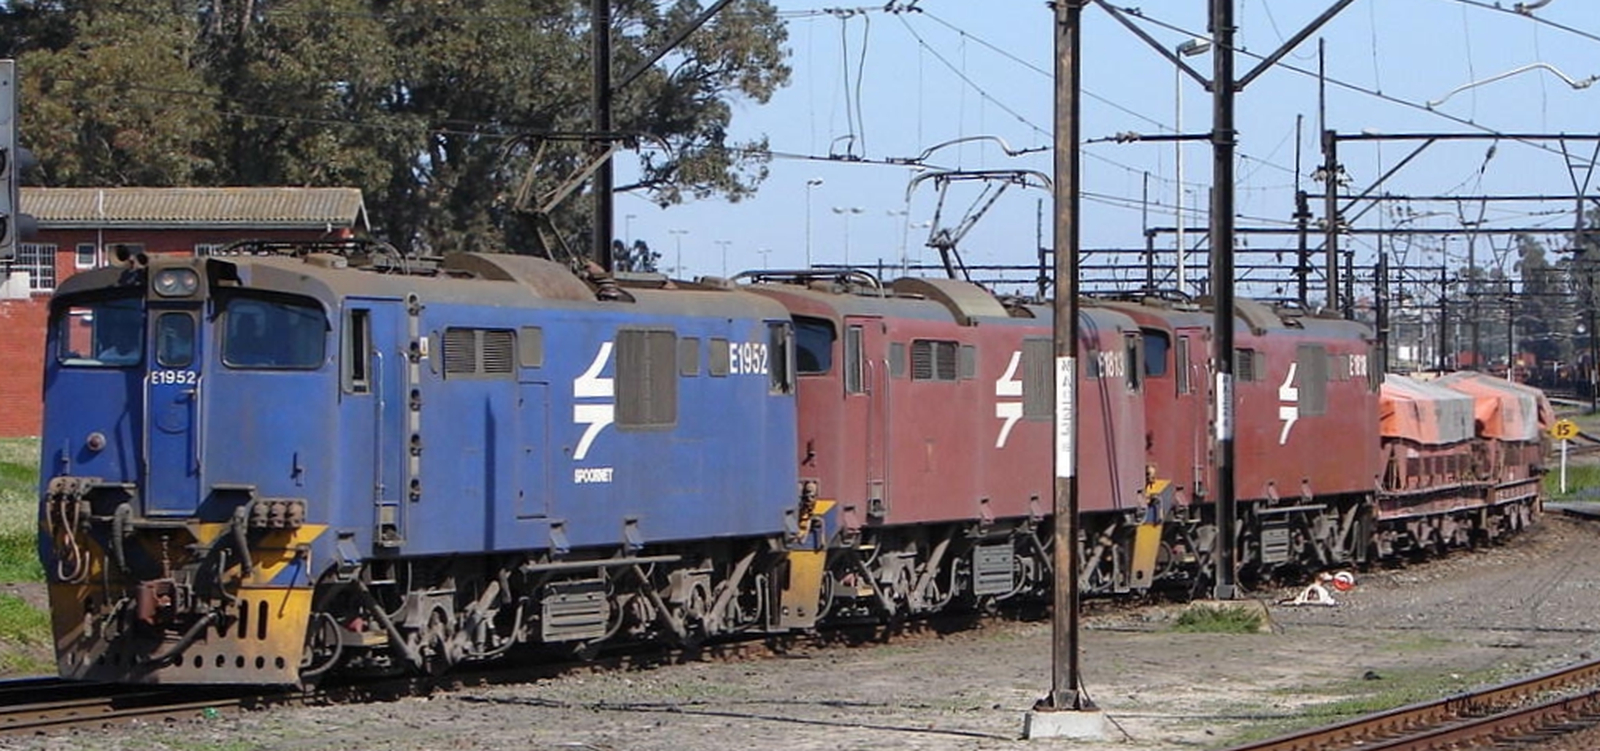 Triple workig of E1952, E1813 and E1818 in October 2007 at Bellville, Cape Town